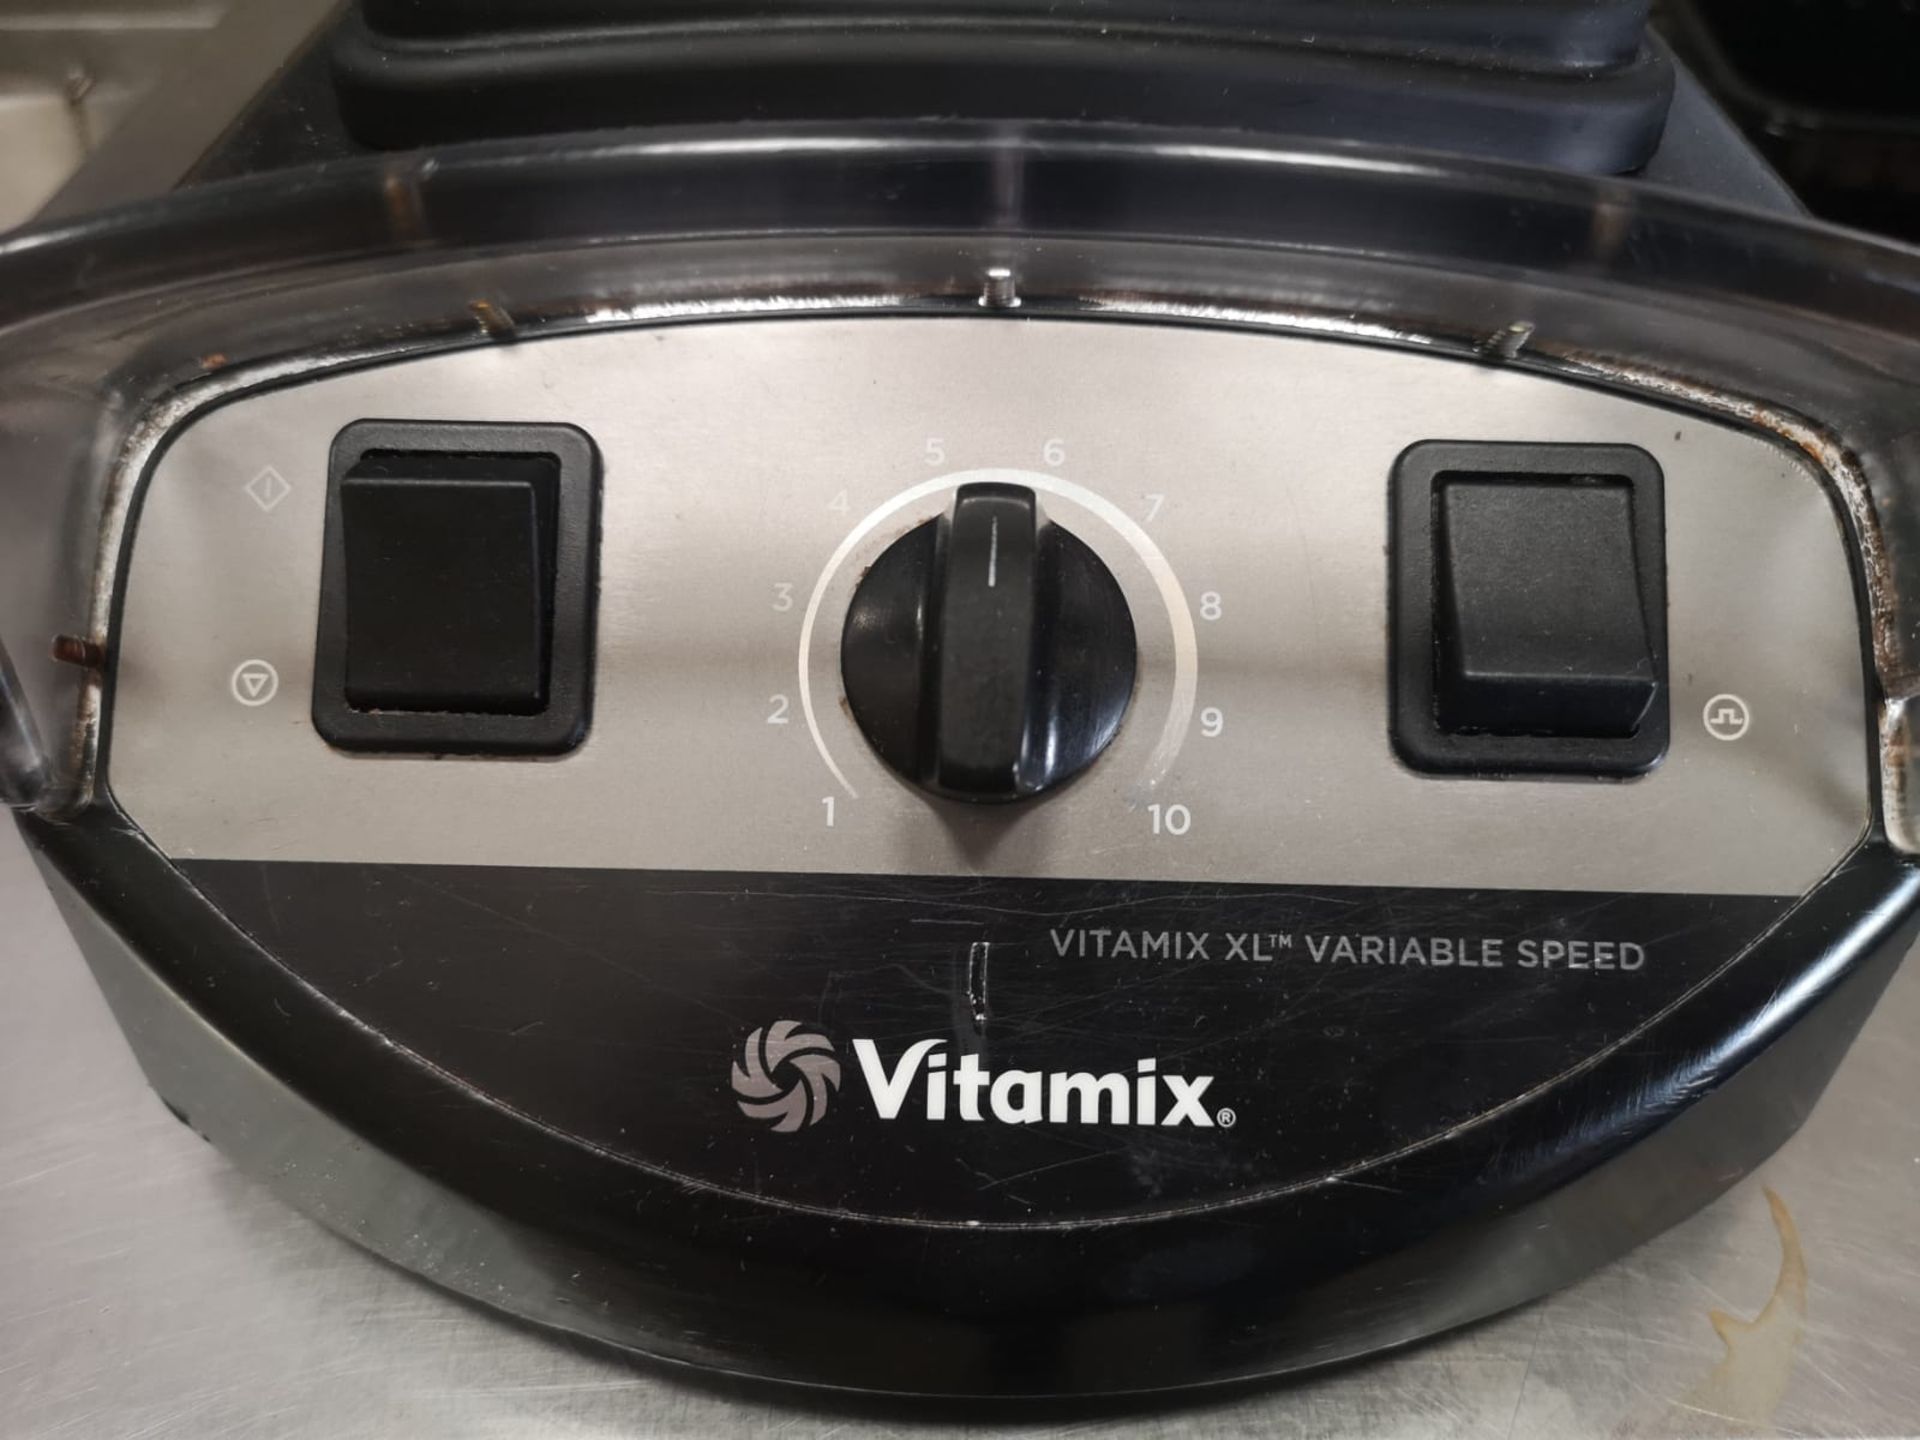 Vitamix XL Variable Speed Commercial Blender - Image 3 of 4